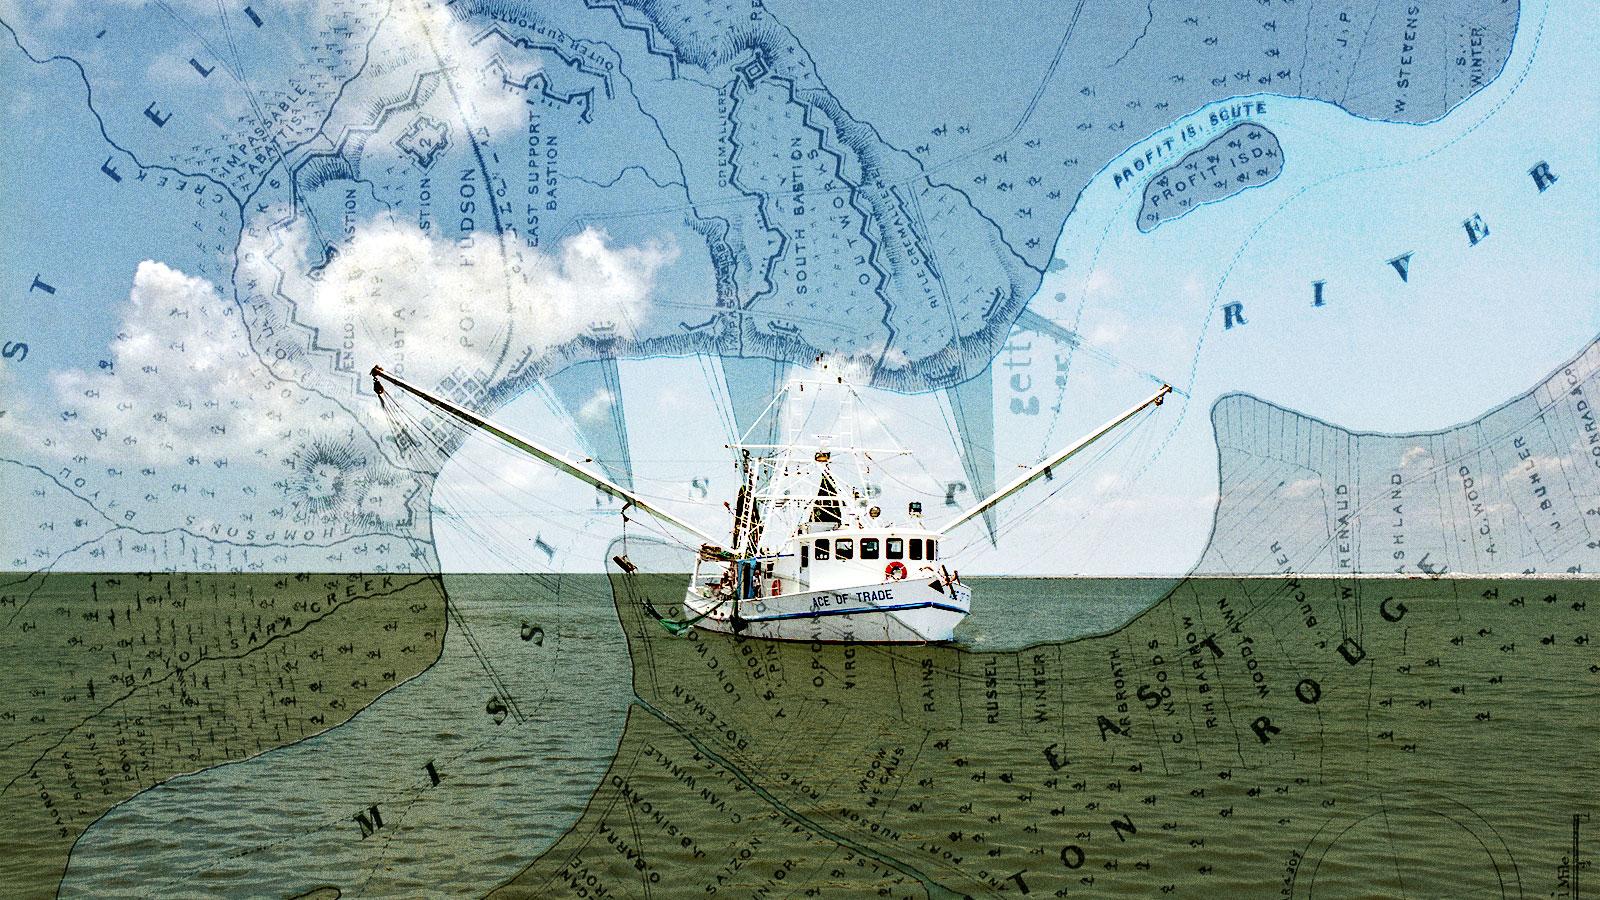 A shrimp boat is shown in a illustration that combines the boat with a map of the Mississippi Delta.